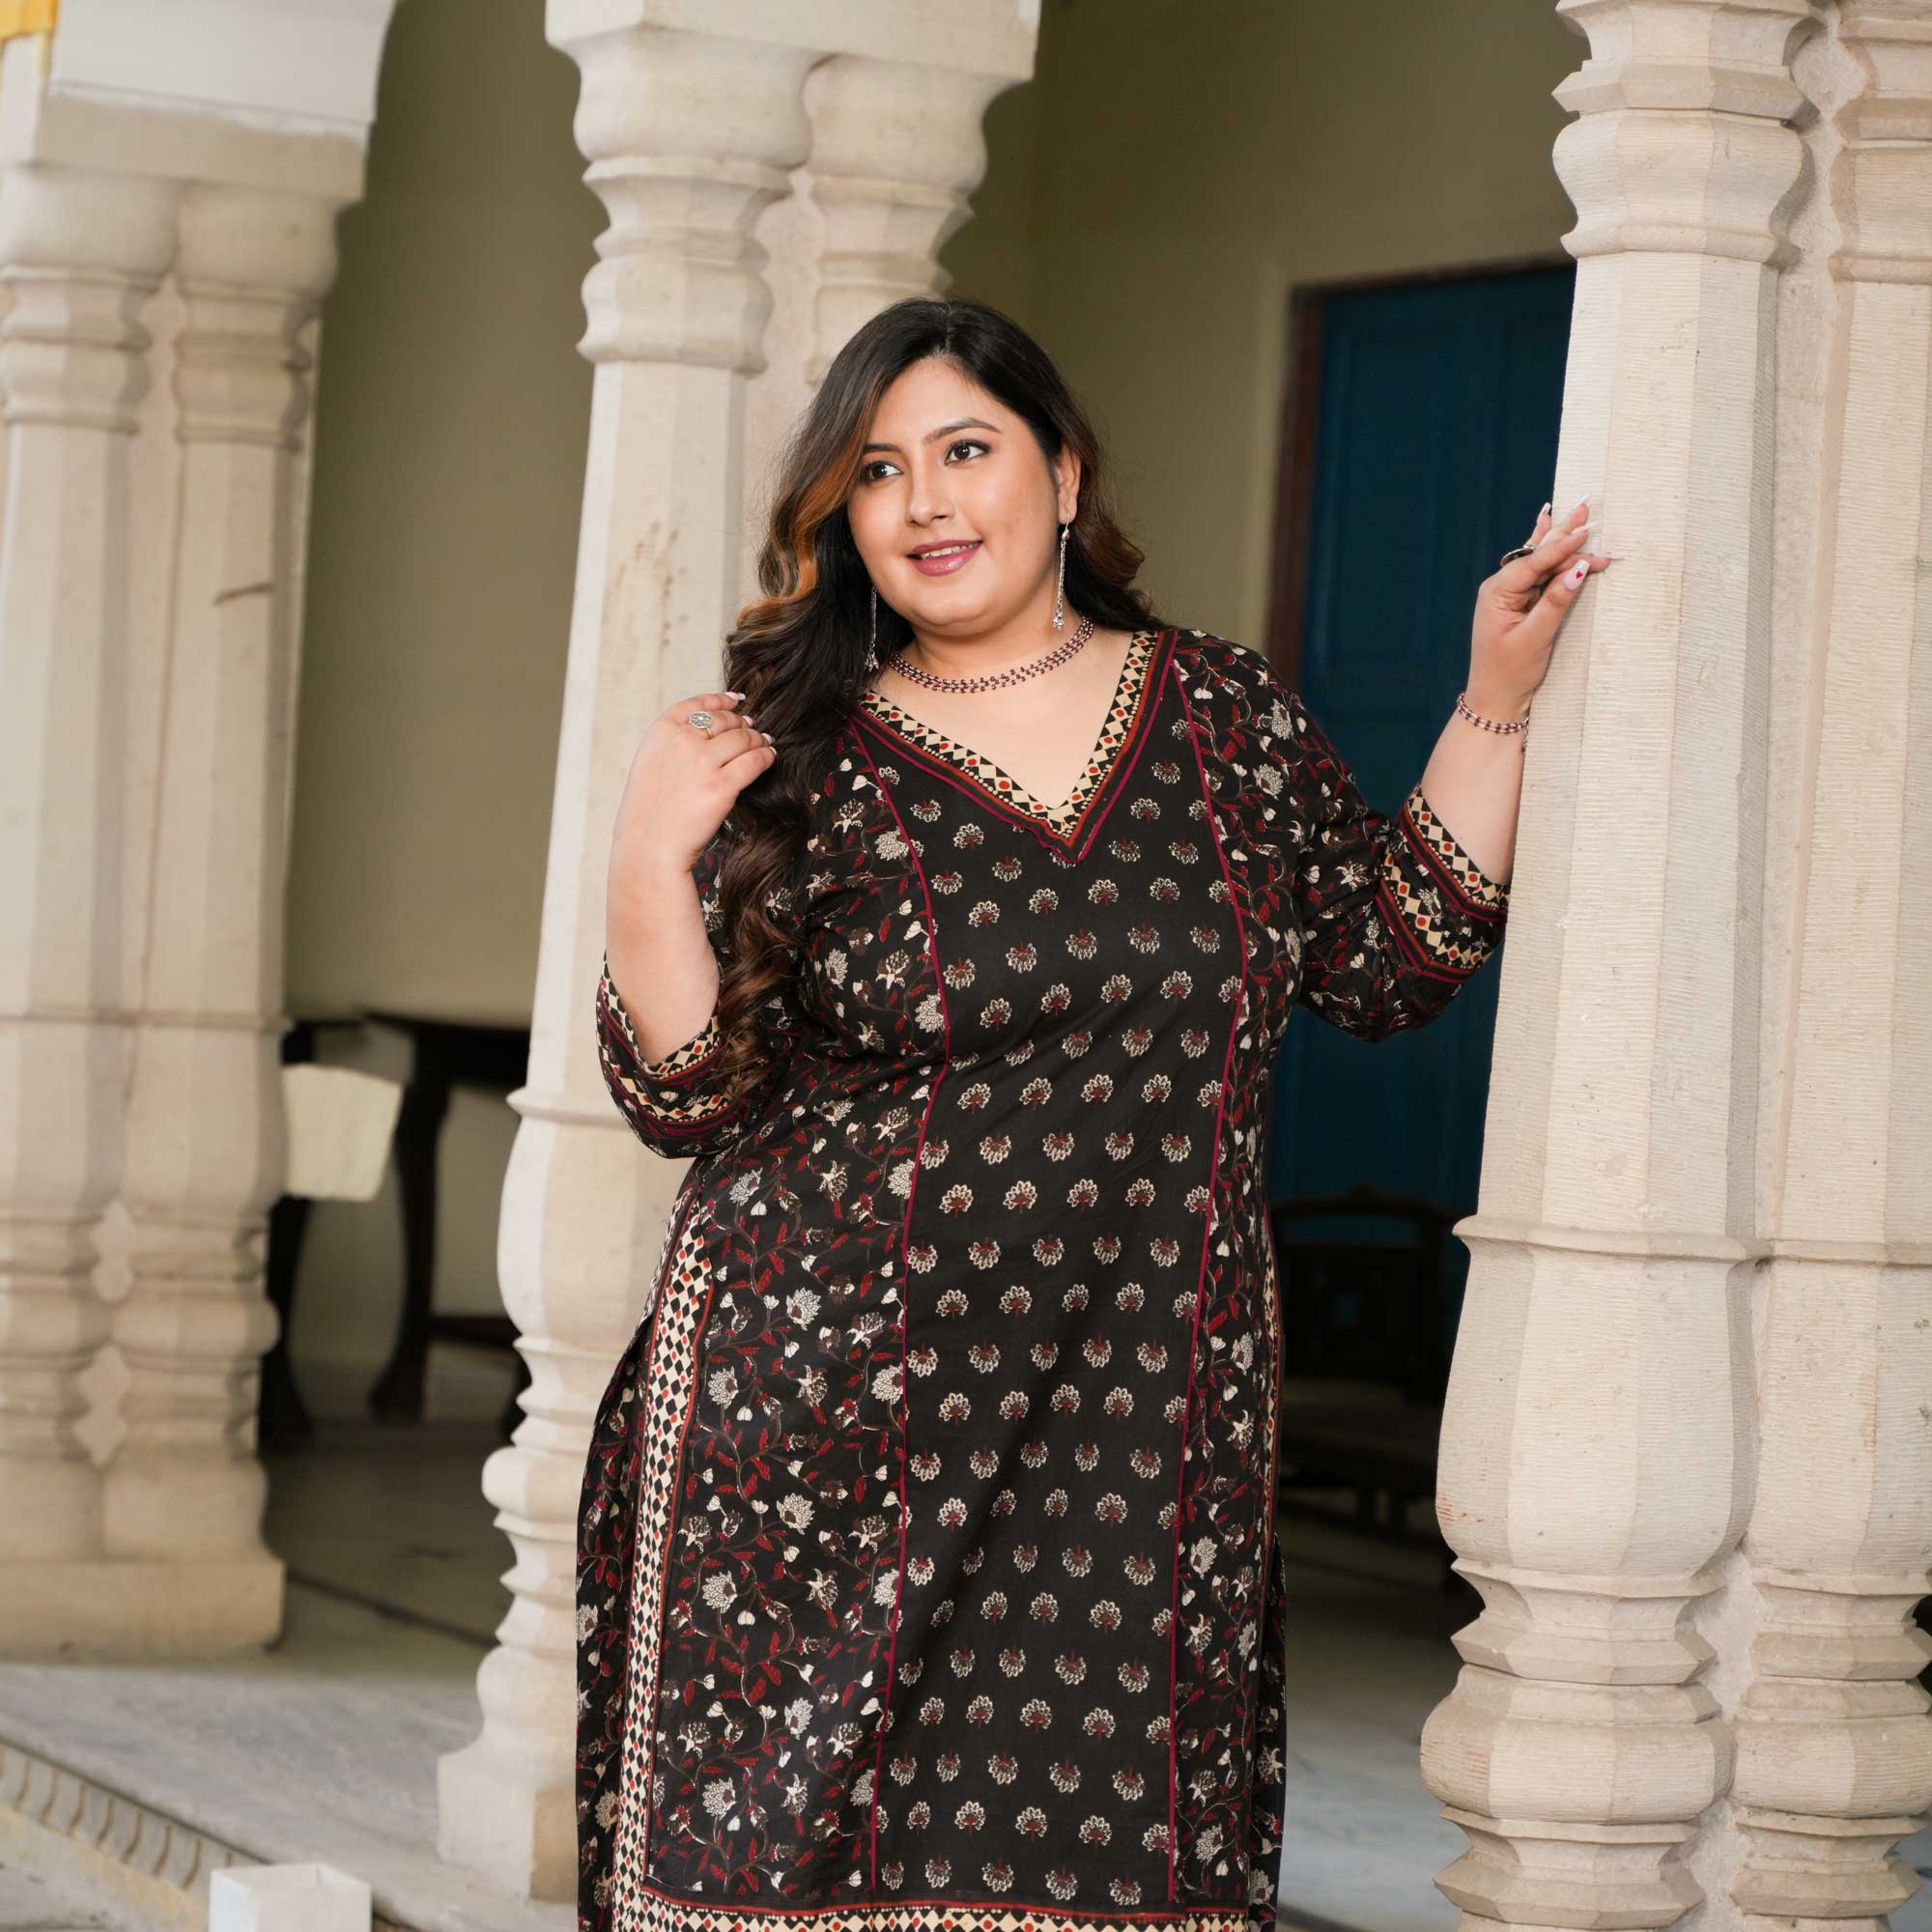 Plus Size Gowns  Made to Measure - Sumissura